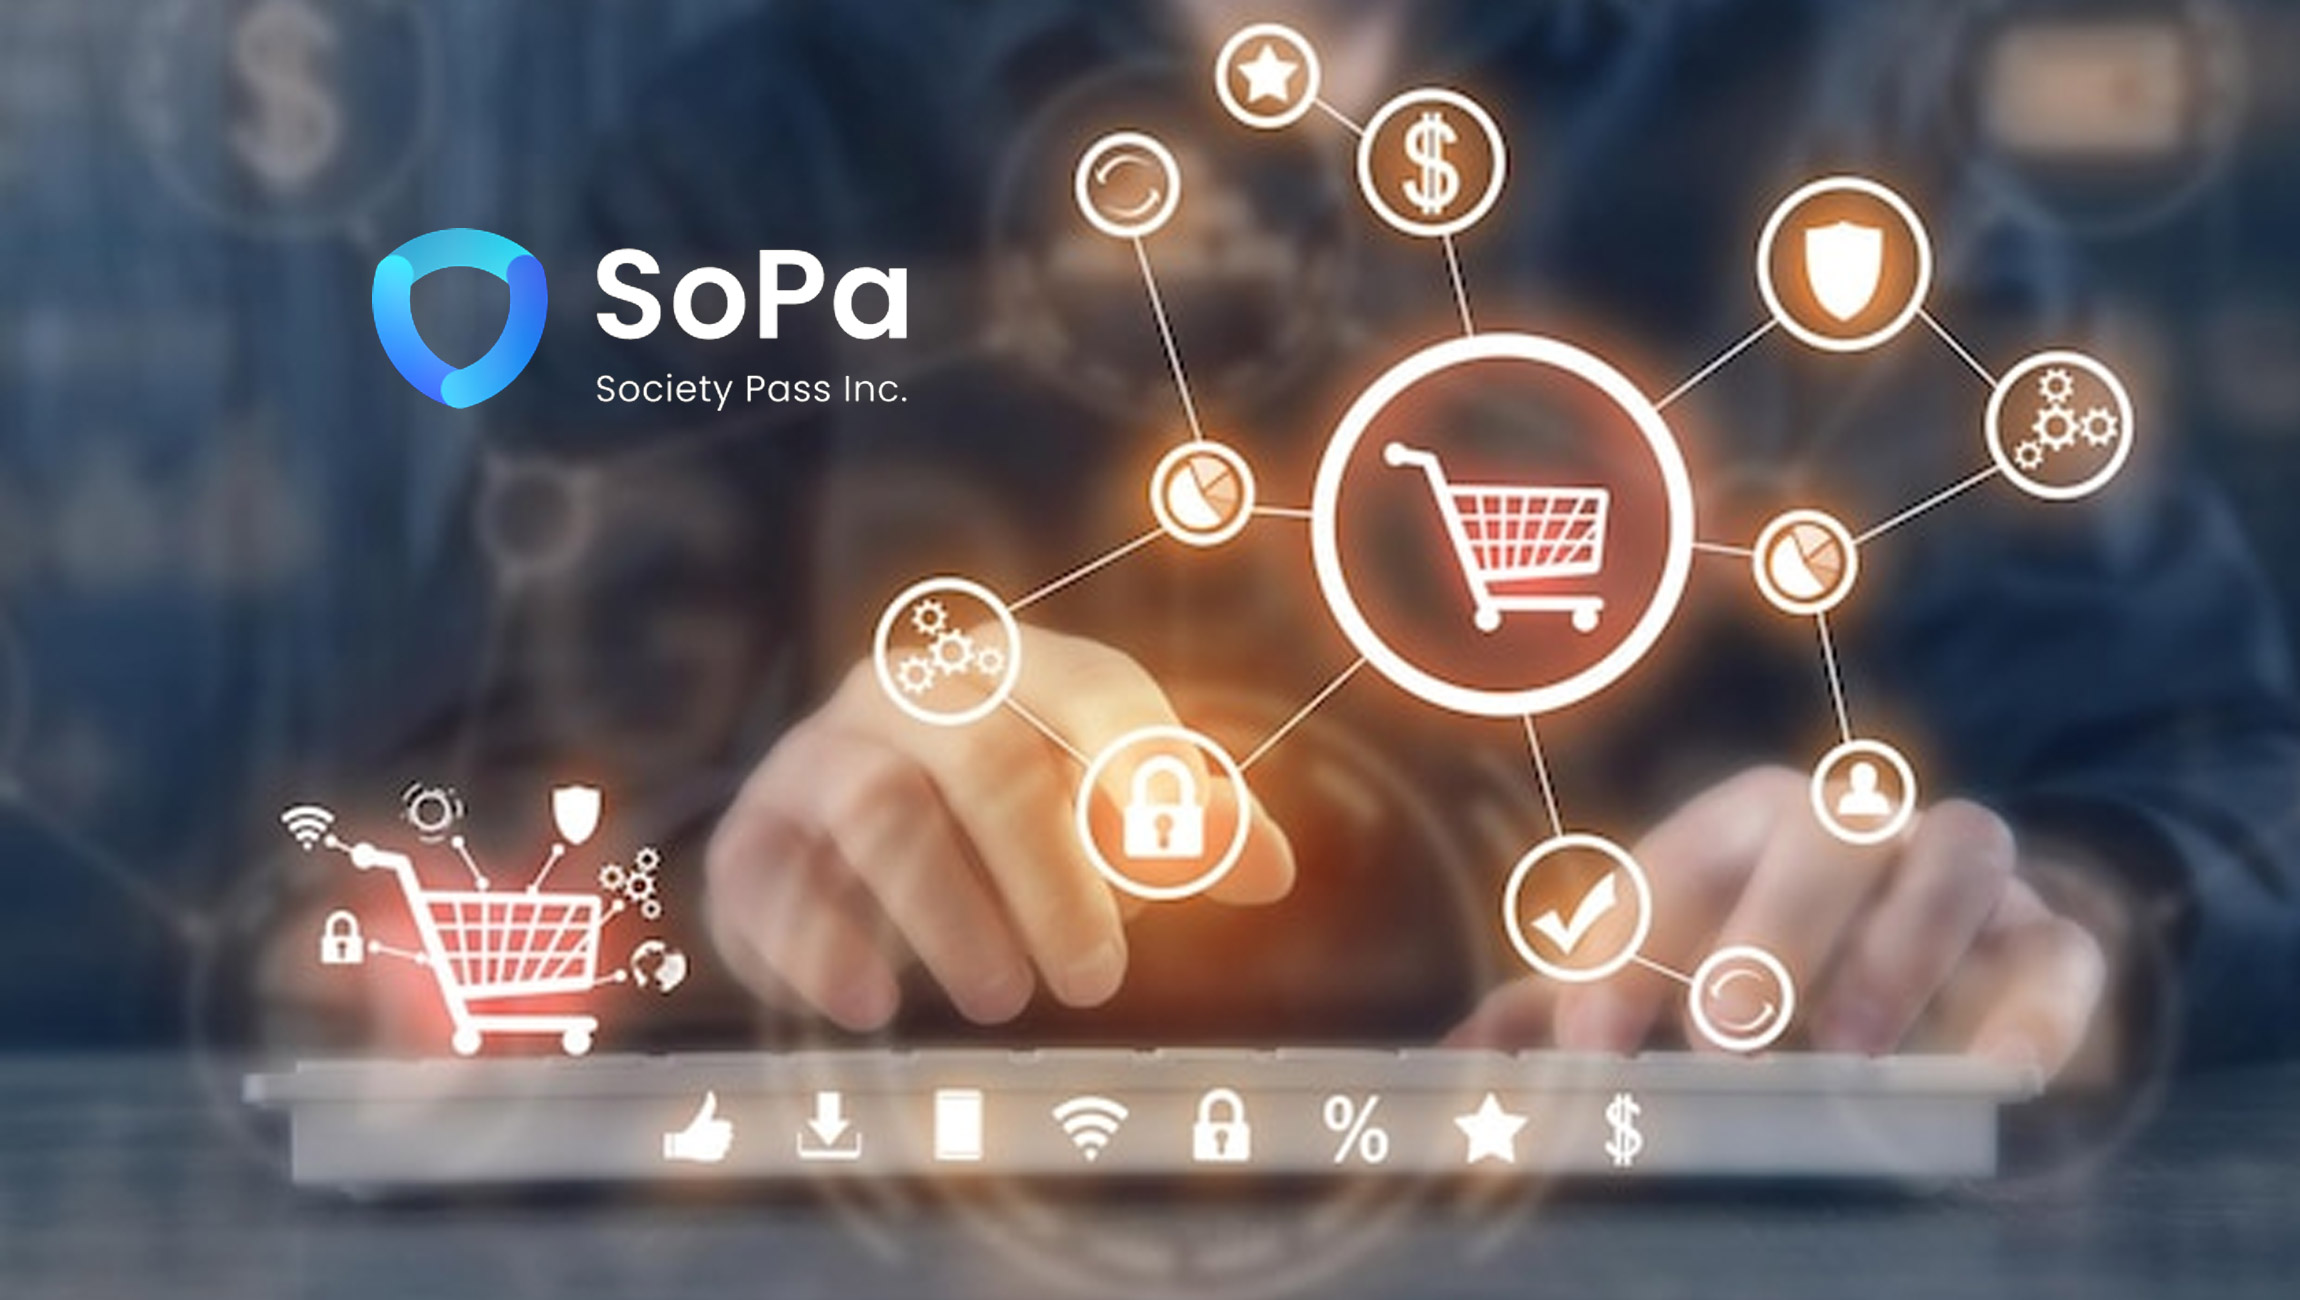 Think Equity: Society Pass (Nasdaq: SOPA) – Initiating Coverage on Digital Commerce Platform for Southeast Asia with Upside Potential